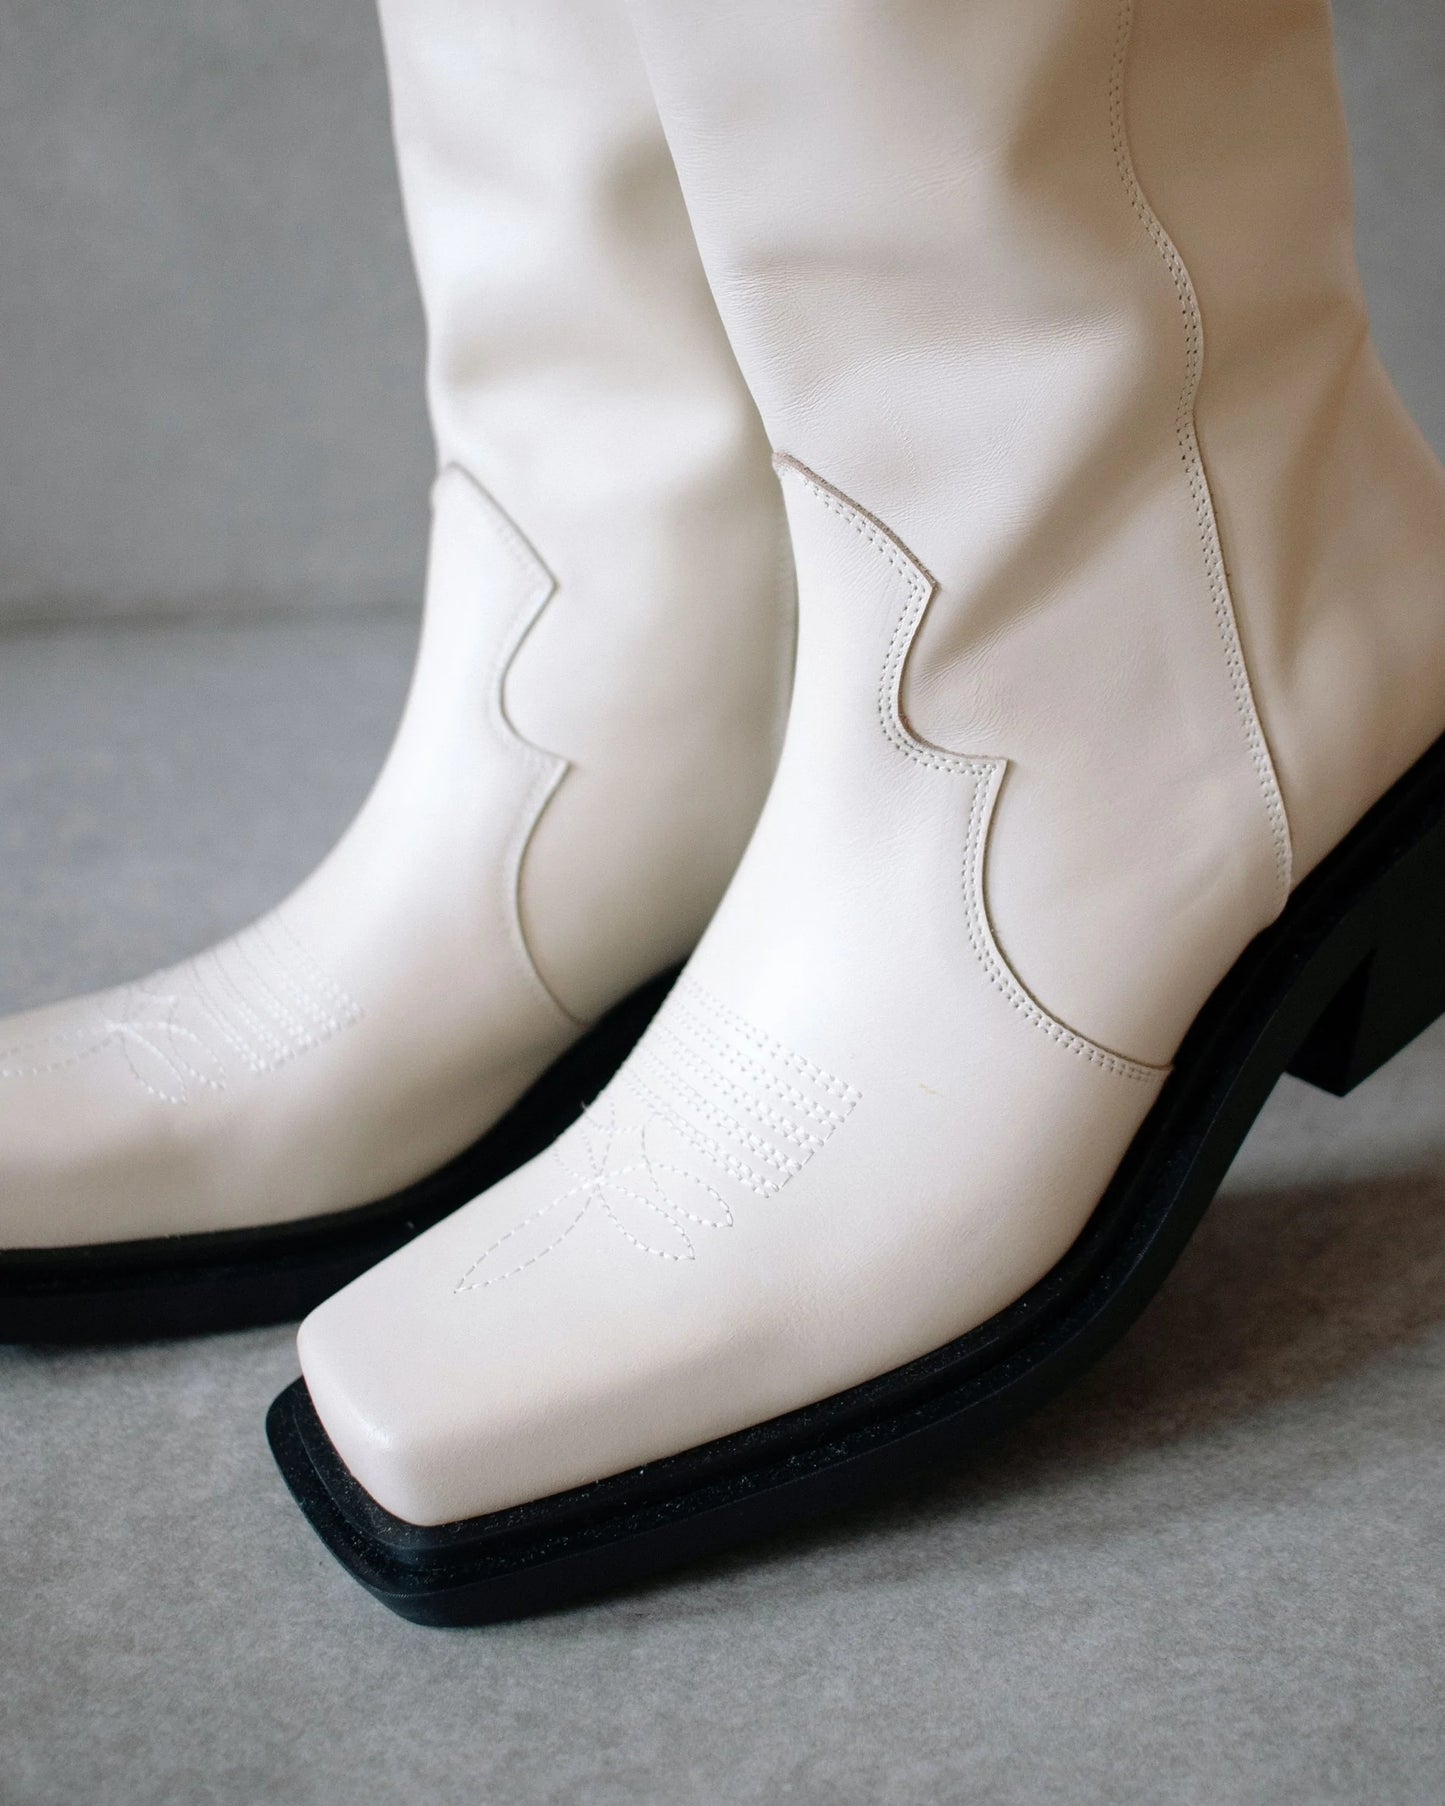 CATTLE IVORY CREAM WESTERN BOOT